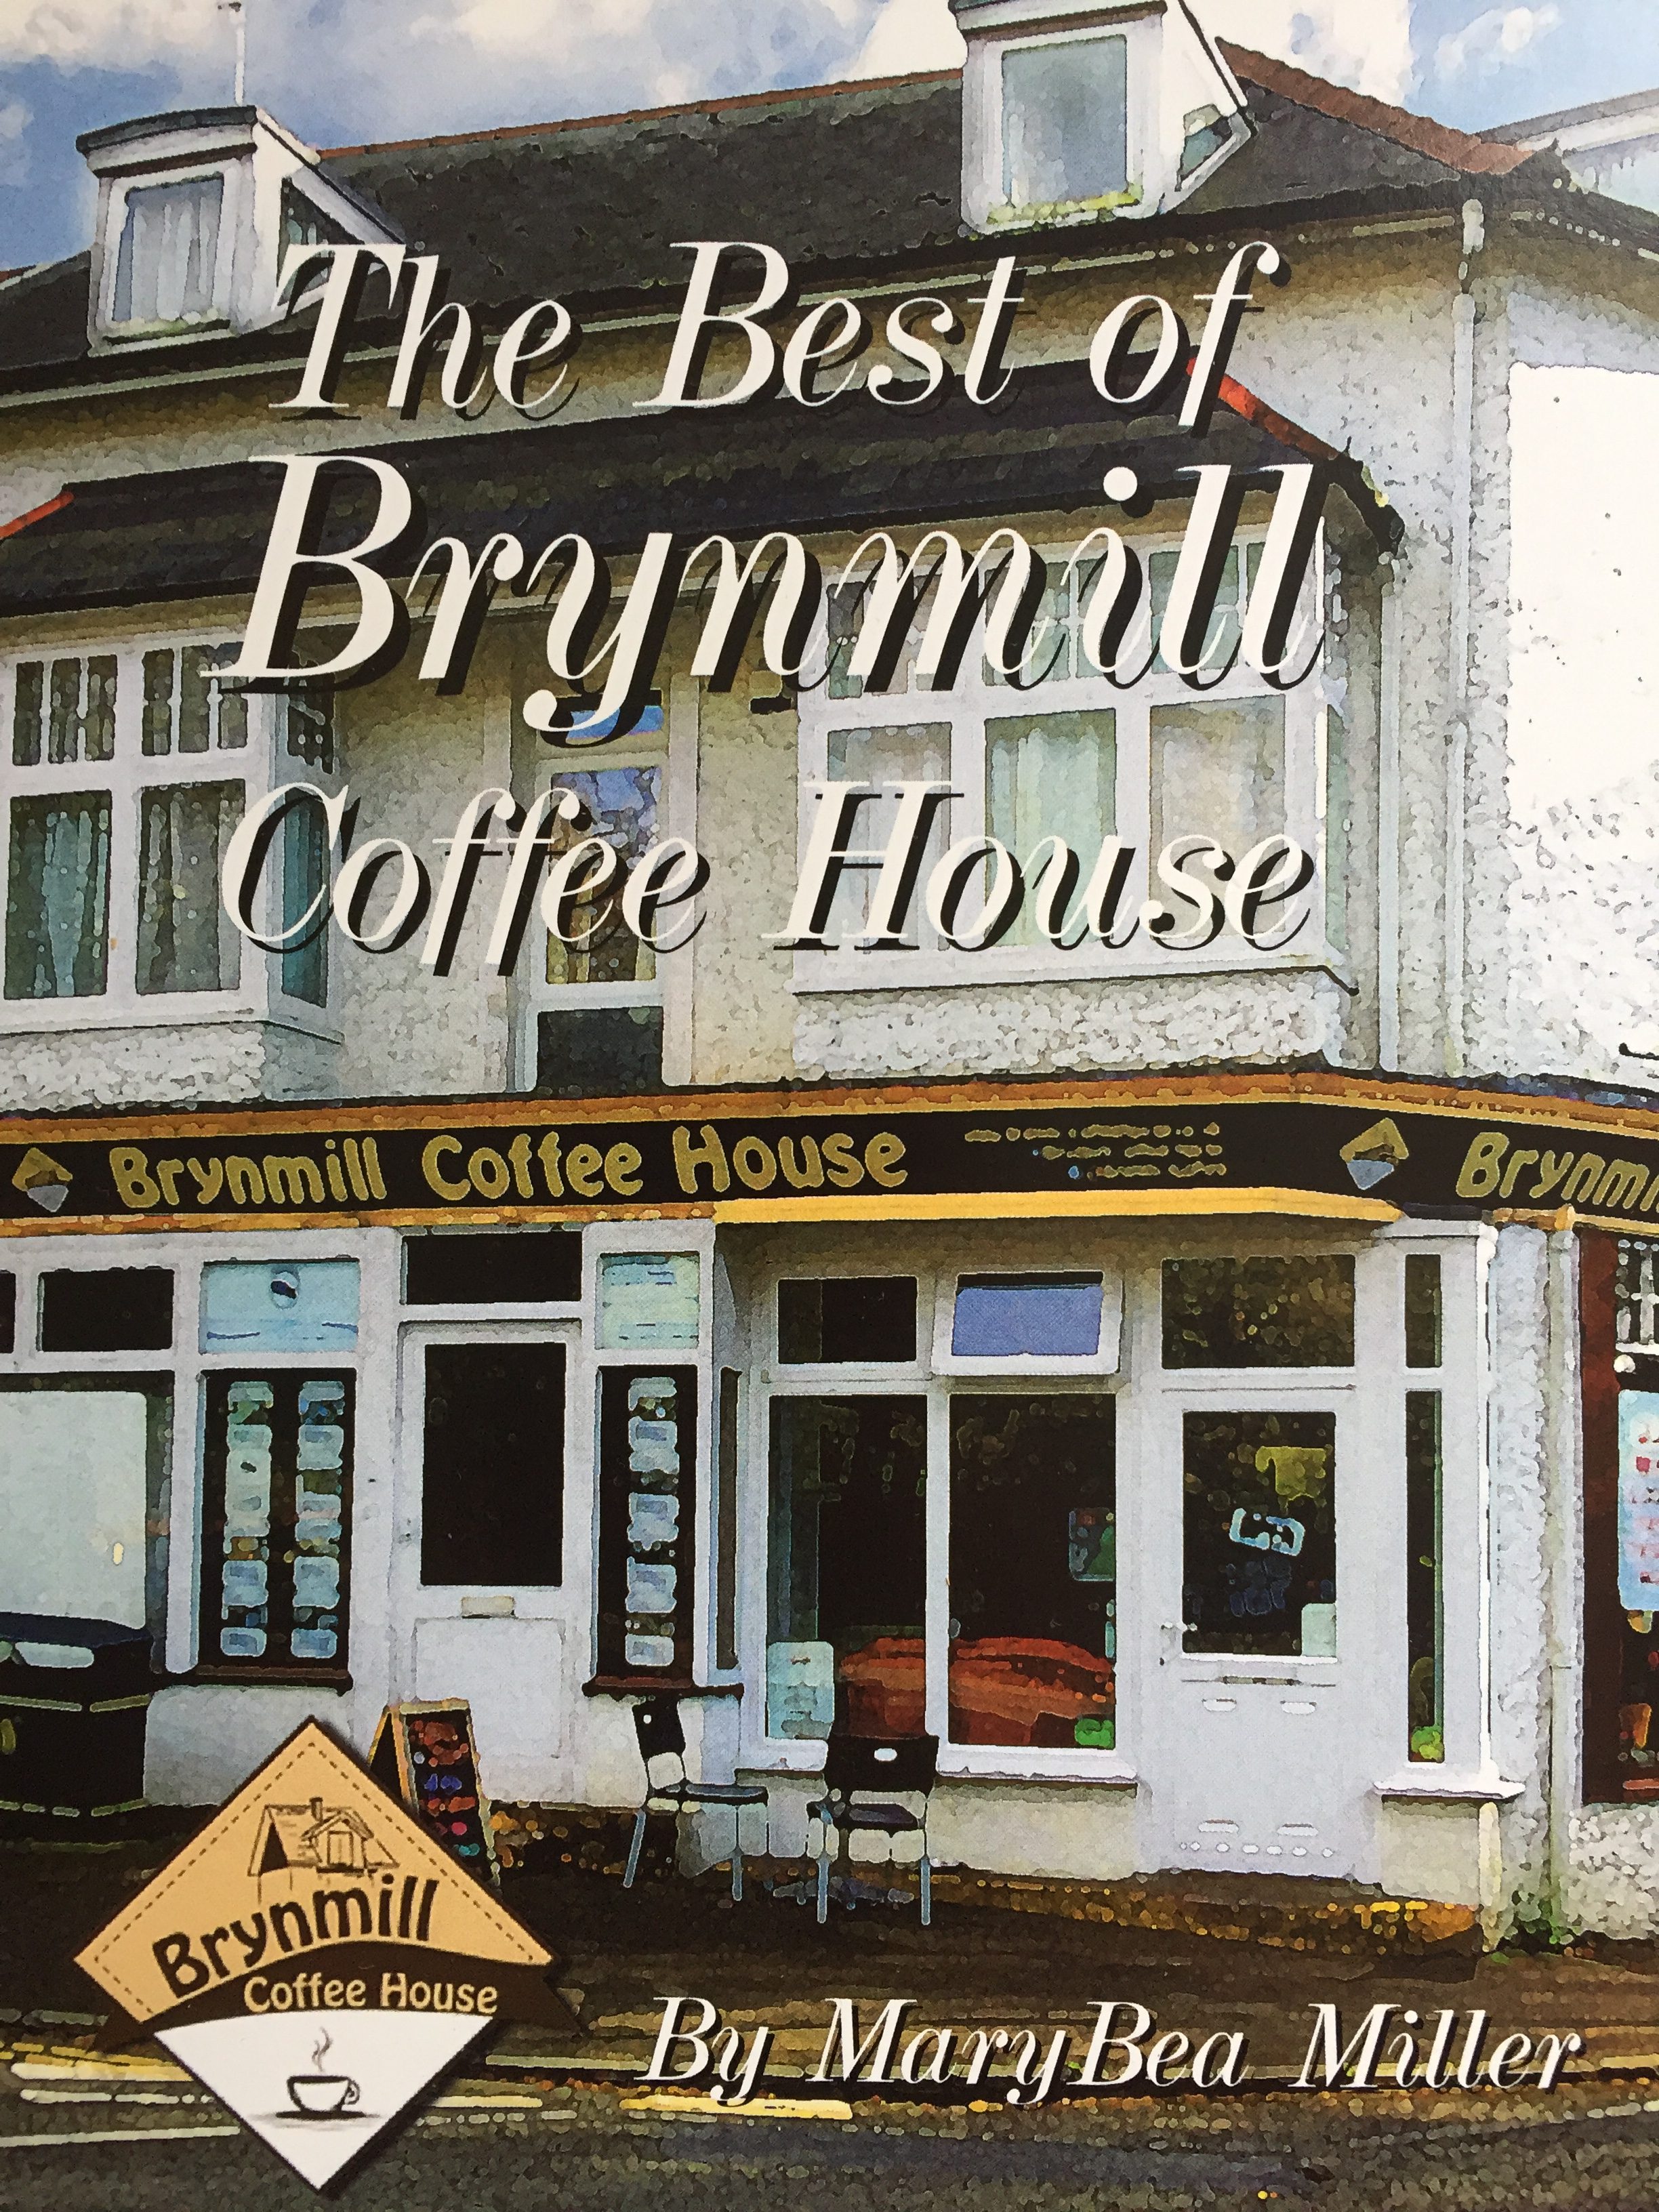 The Brynmill Coffee House Cook Book